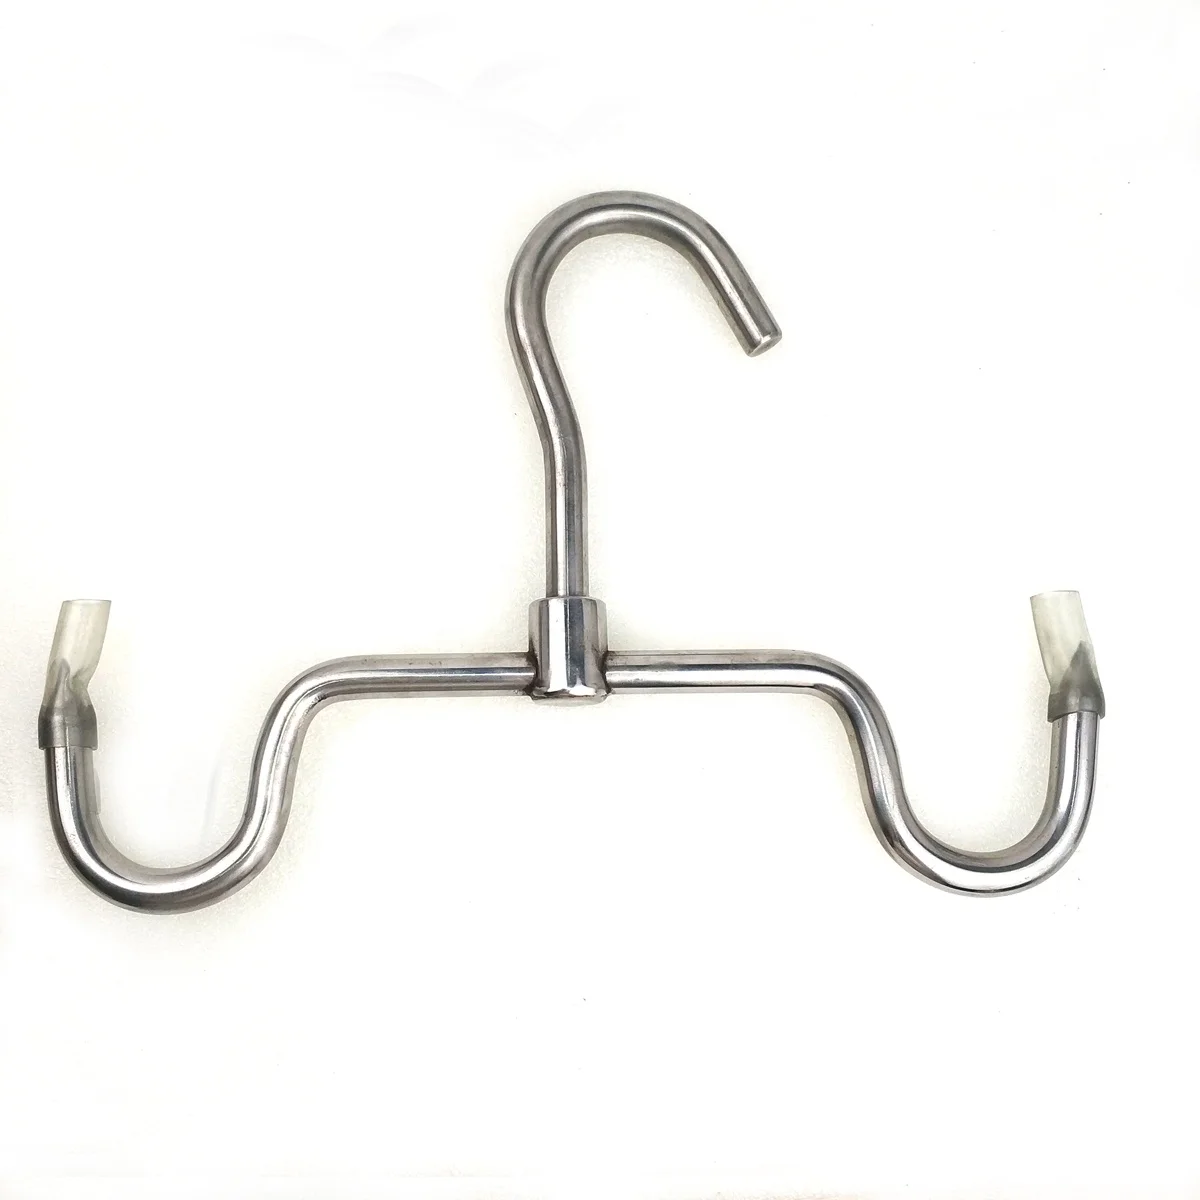 Meat Hooks Stainless Steel Butcher Hooks Meat Processing High Quality 20 Pcs 